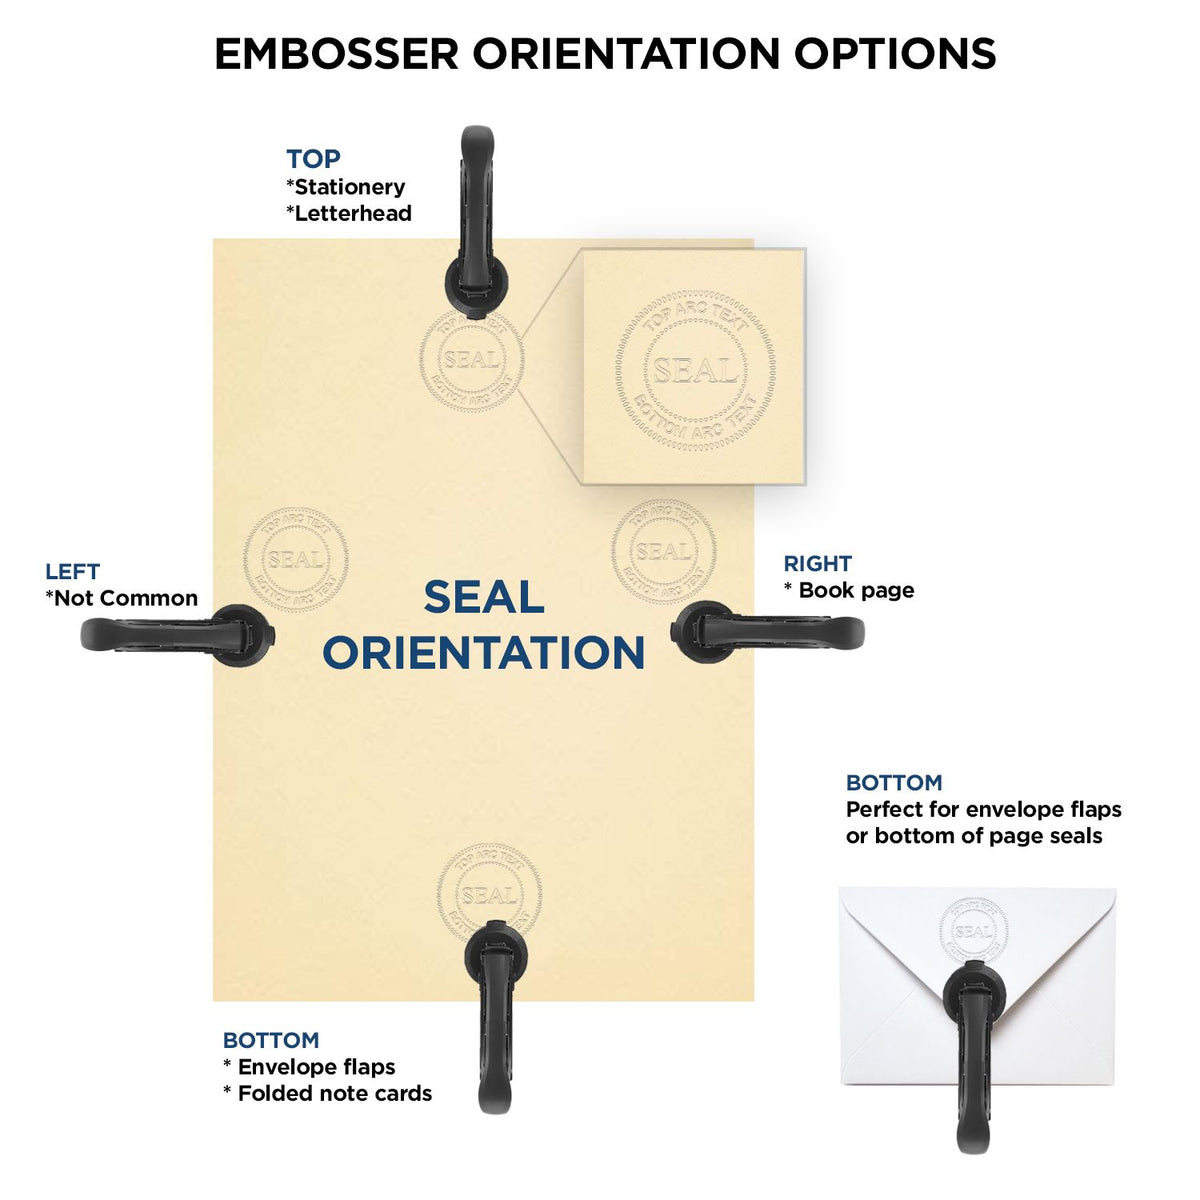 An infographic for the Handheld Vermont Architect Seal Embosser showing embosser orientation, this is showing examples of a top, bottom, right and left insert.